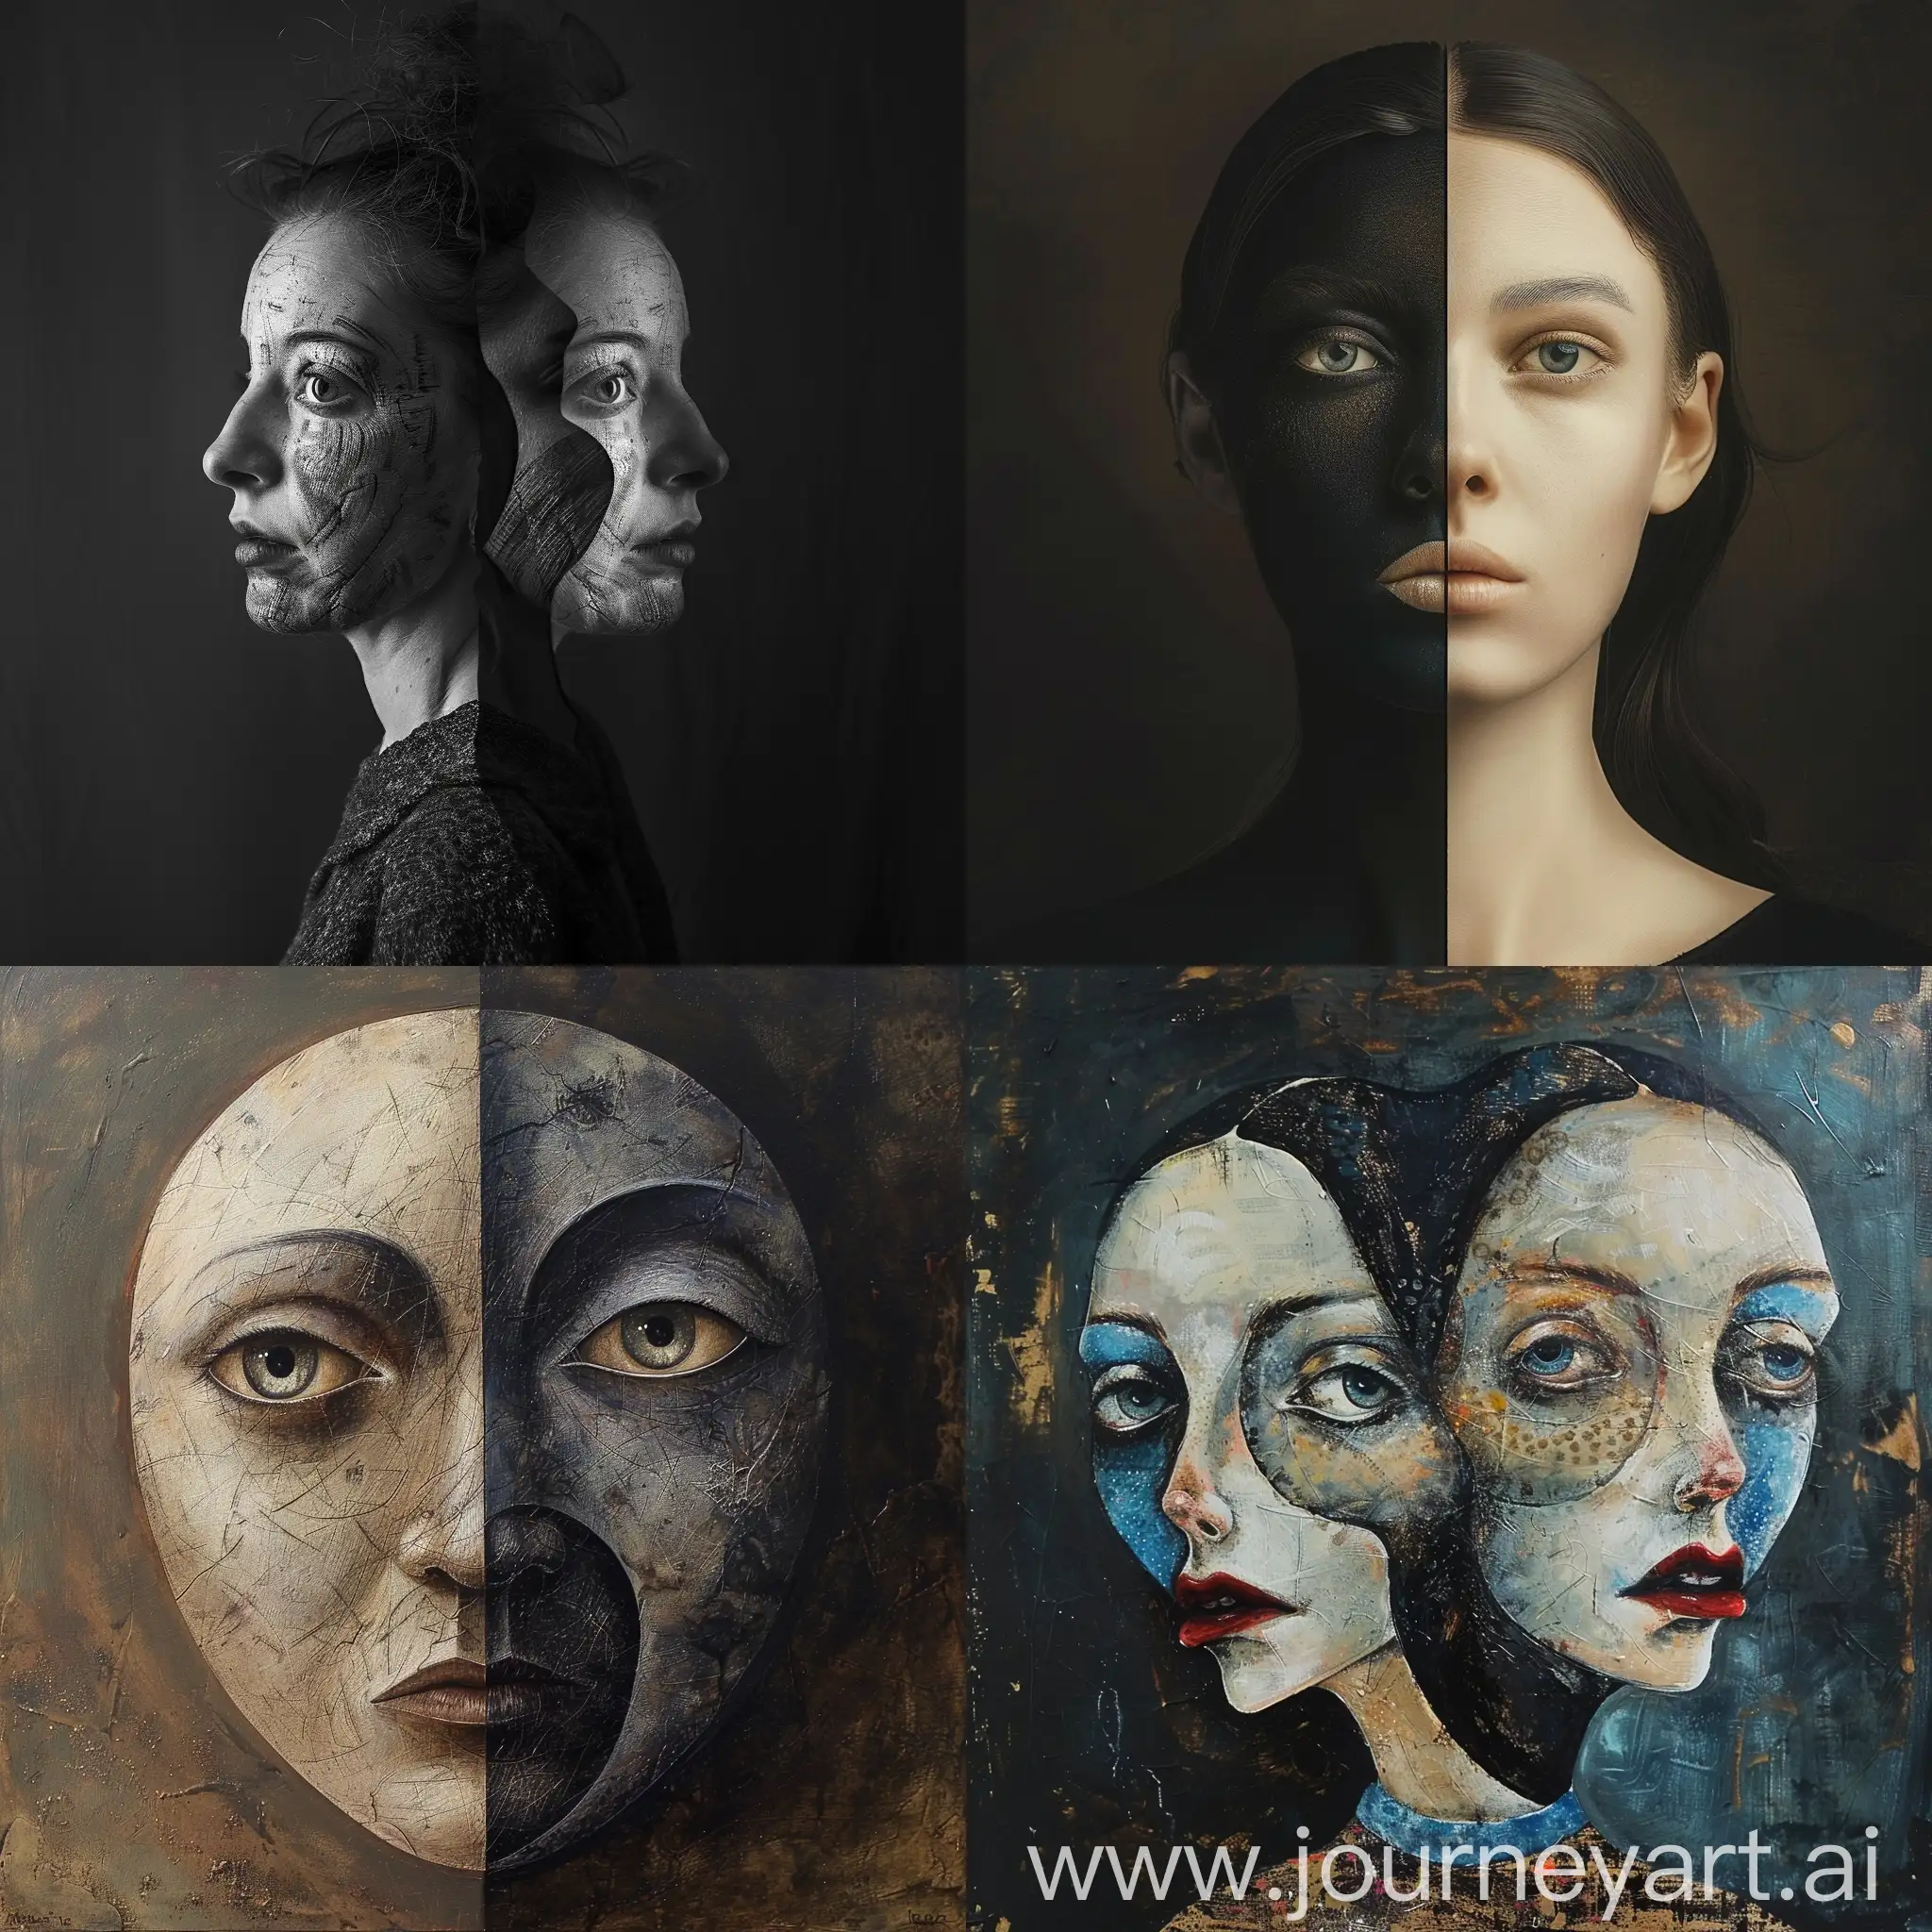 DualFaced-Portrait-Art-A-Study-in-Duality-and-Contrasts